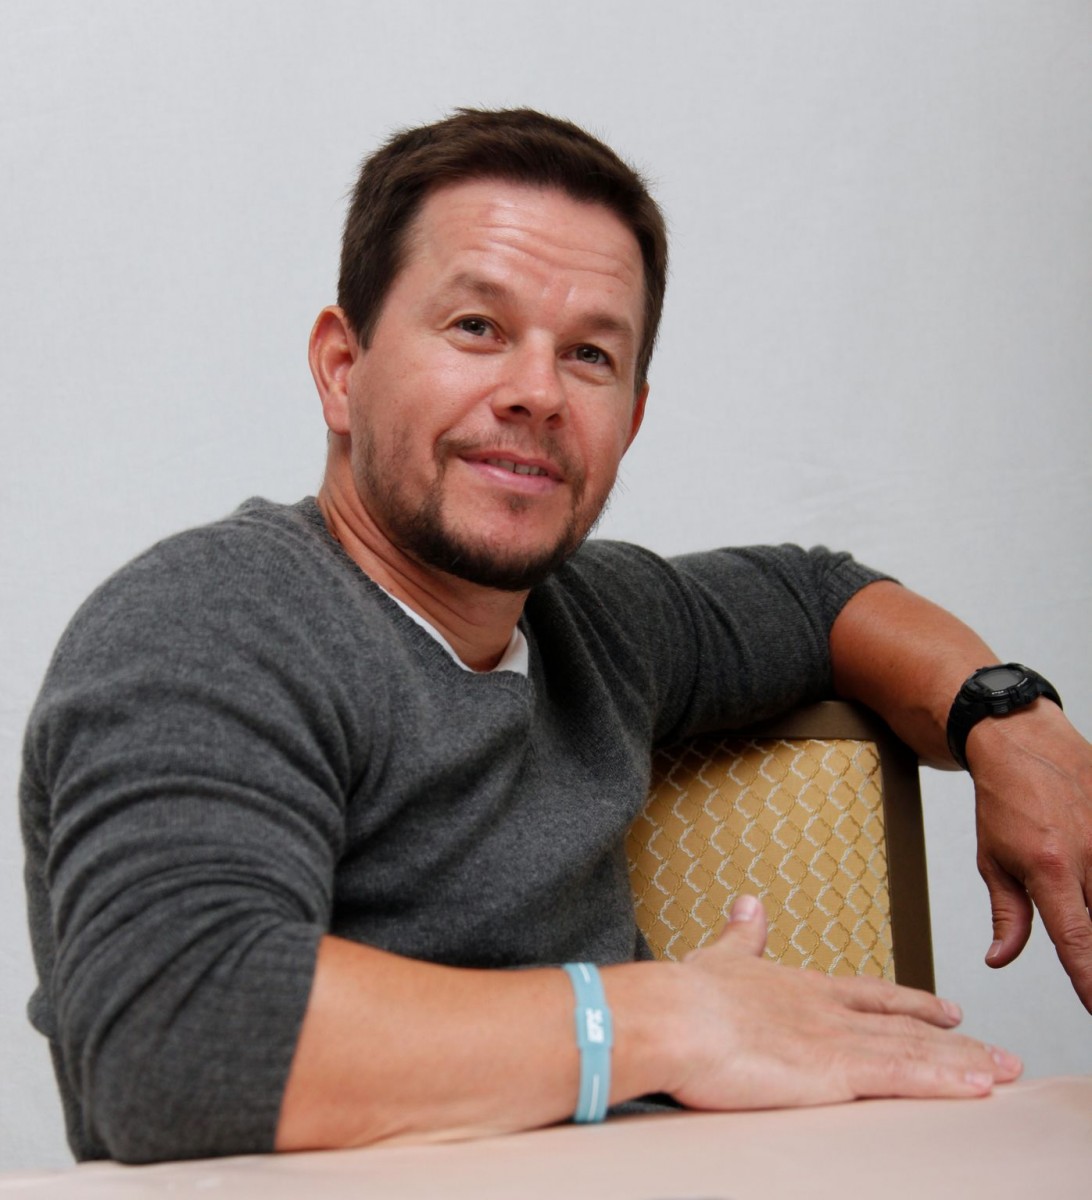 Mark Wahlberg photo 87 of 89 pics, wallpaper - photo #773818 - ThePlace2